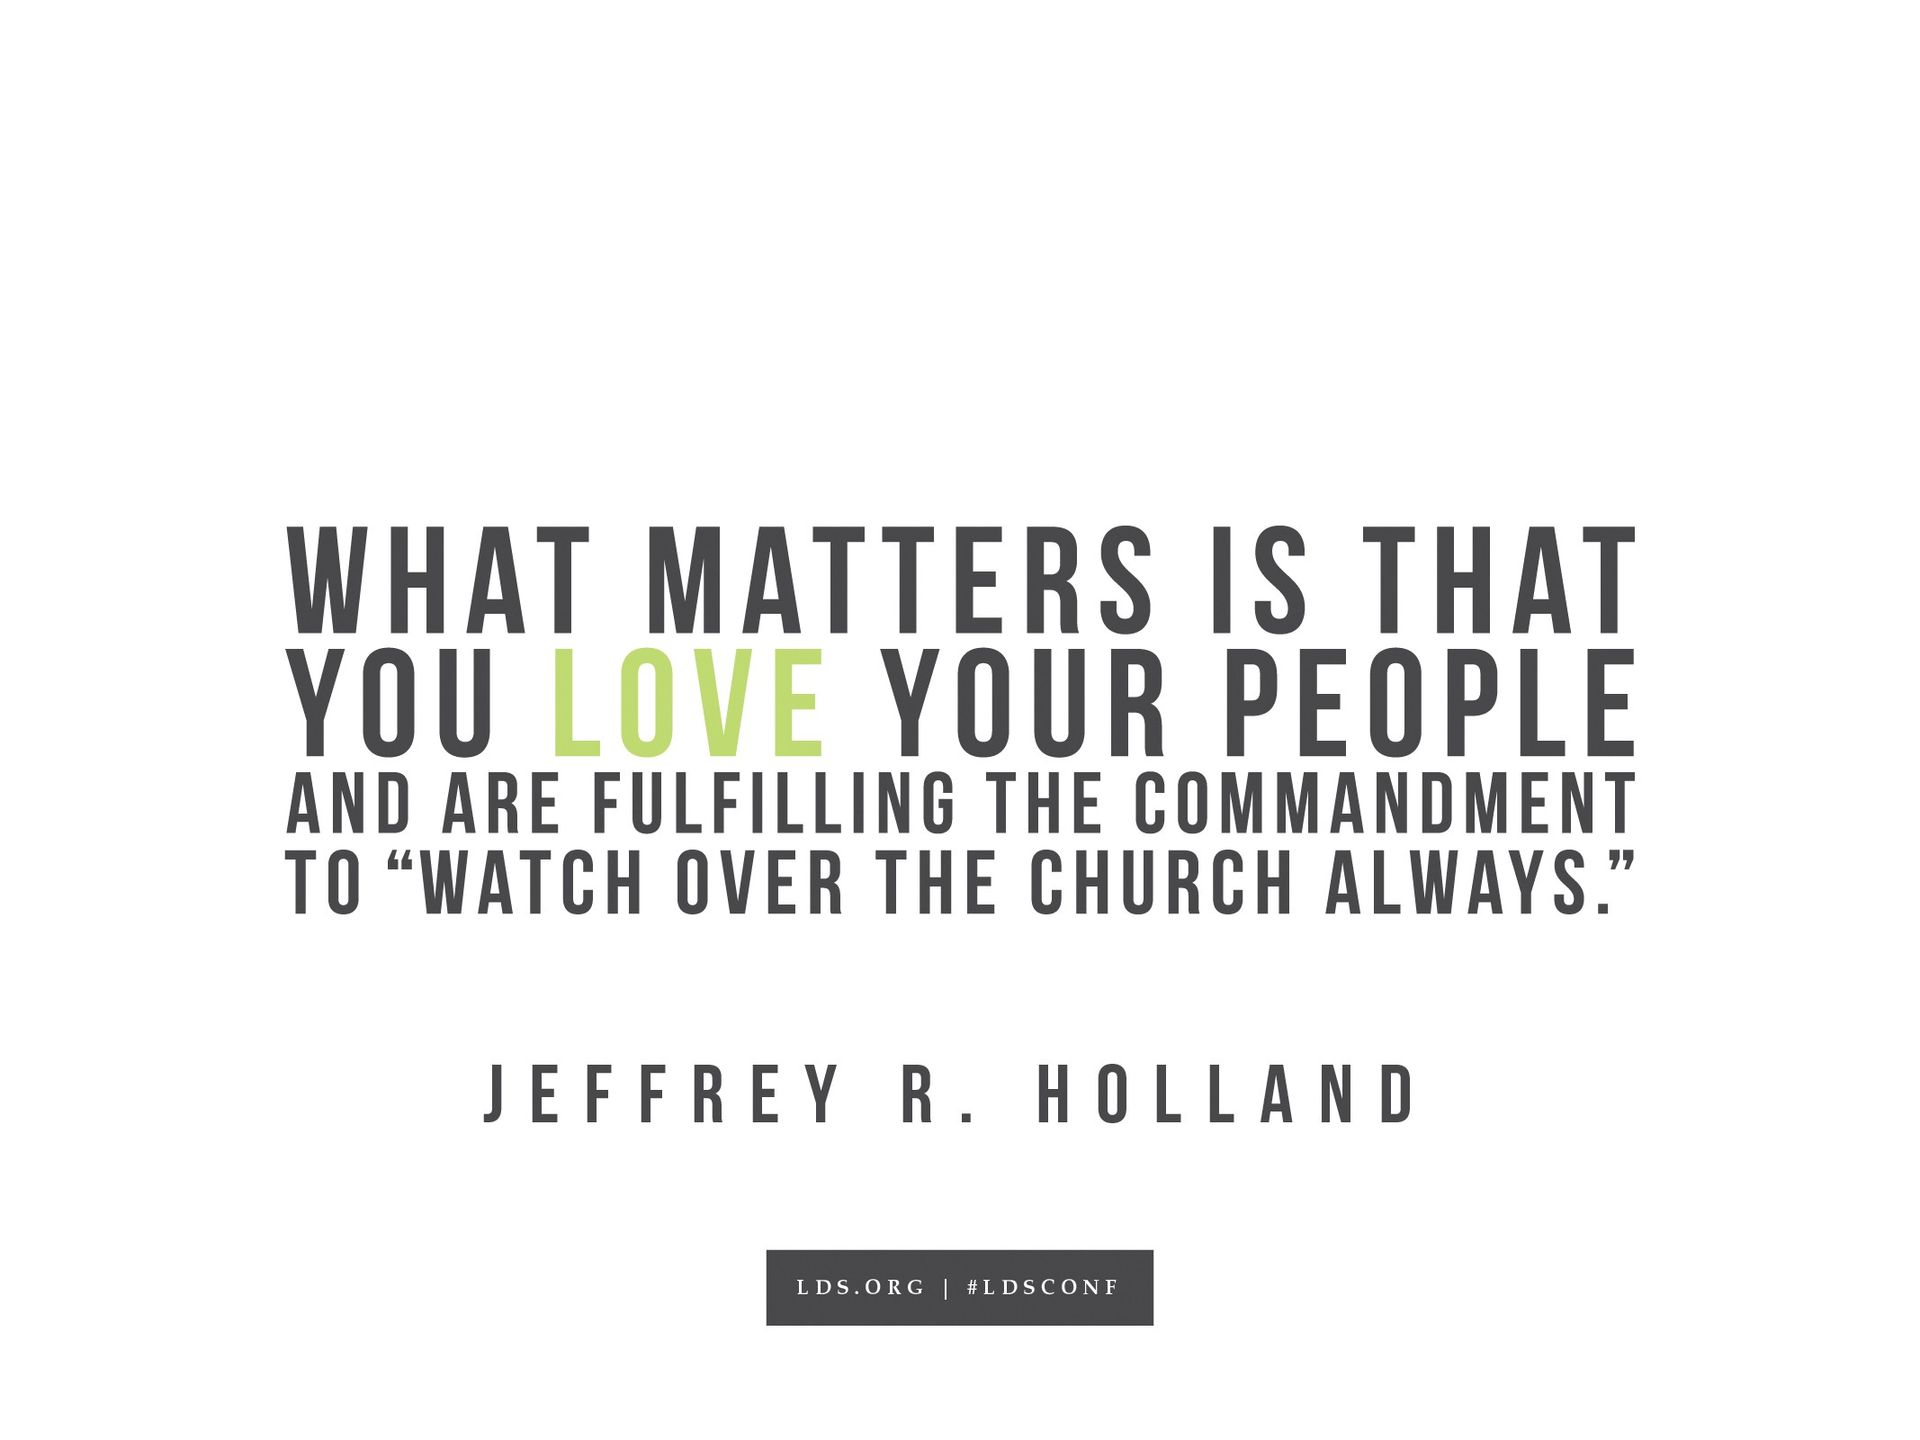 “What matters is that you love your people and are fulfilling the commandment ‘to watch over the church always.’”—Elder Jeffrey R. Holland, “Emissaries to the Church”